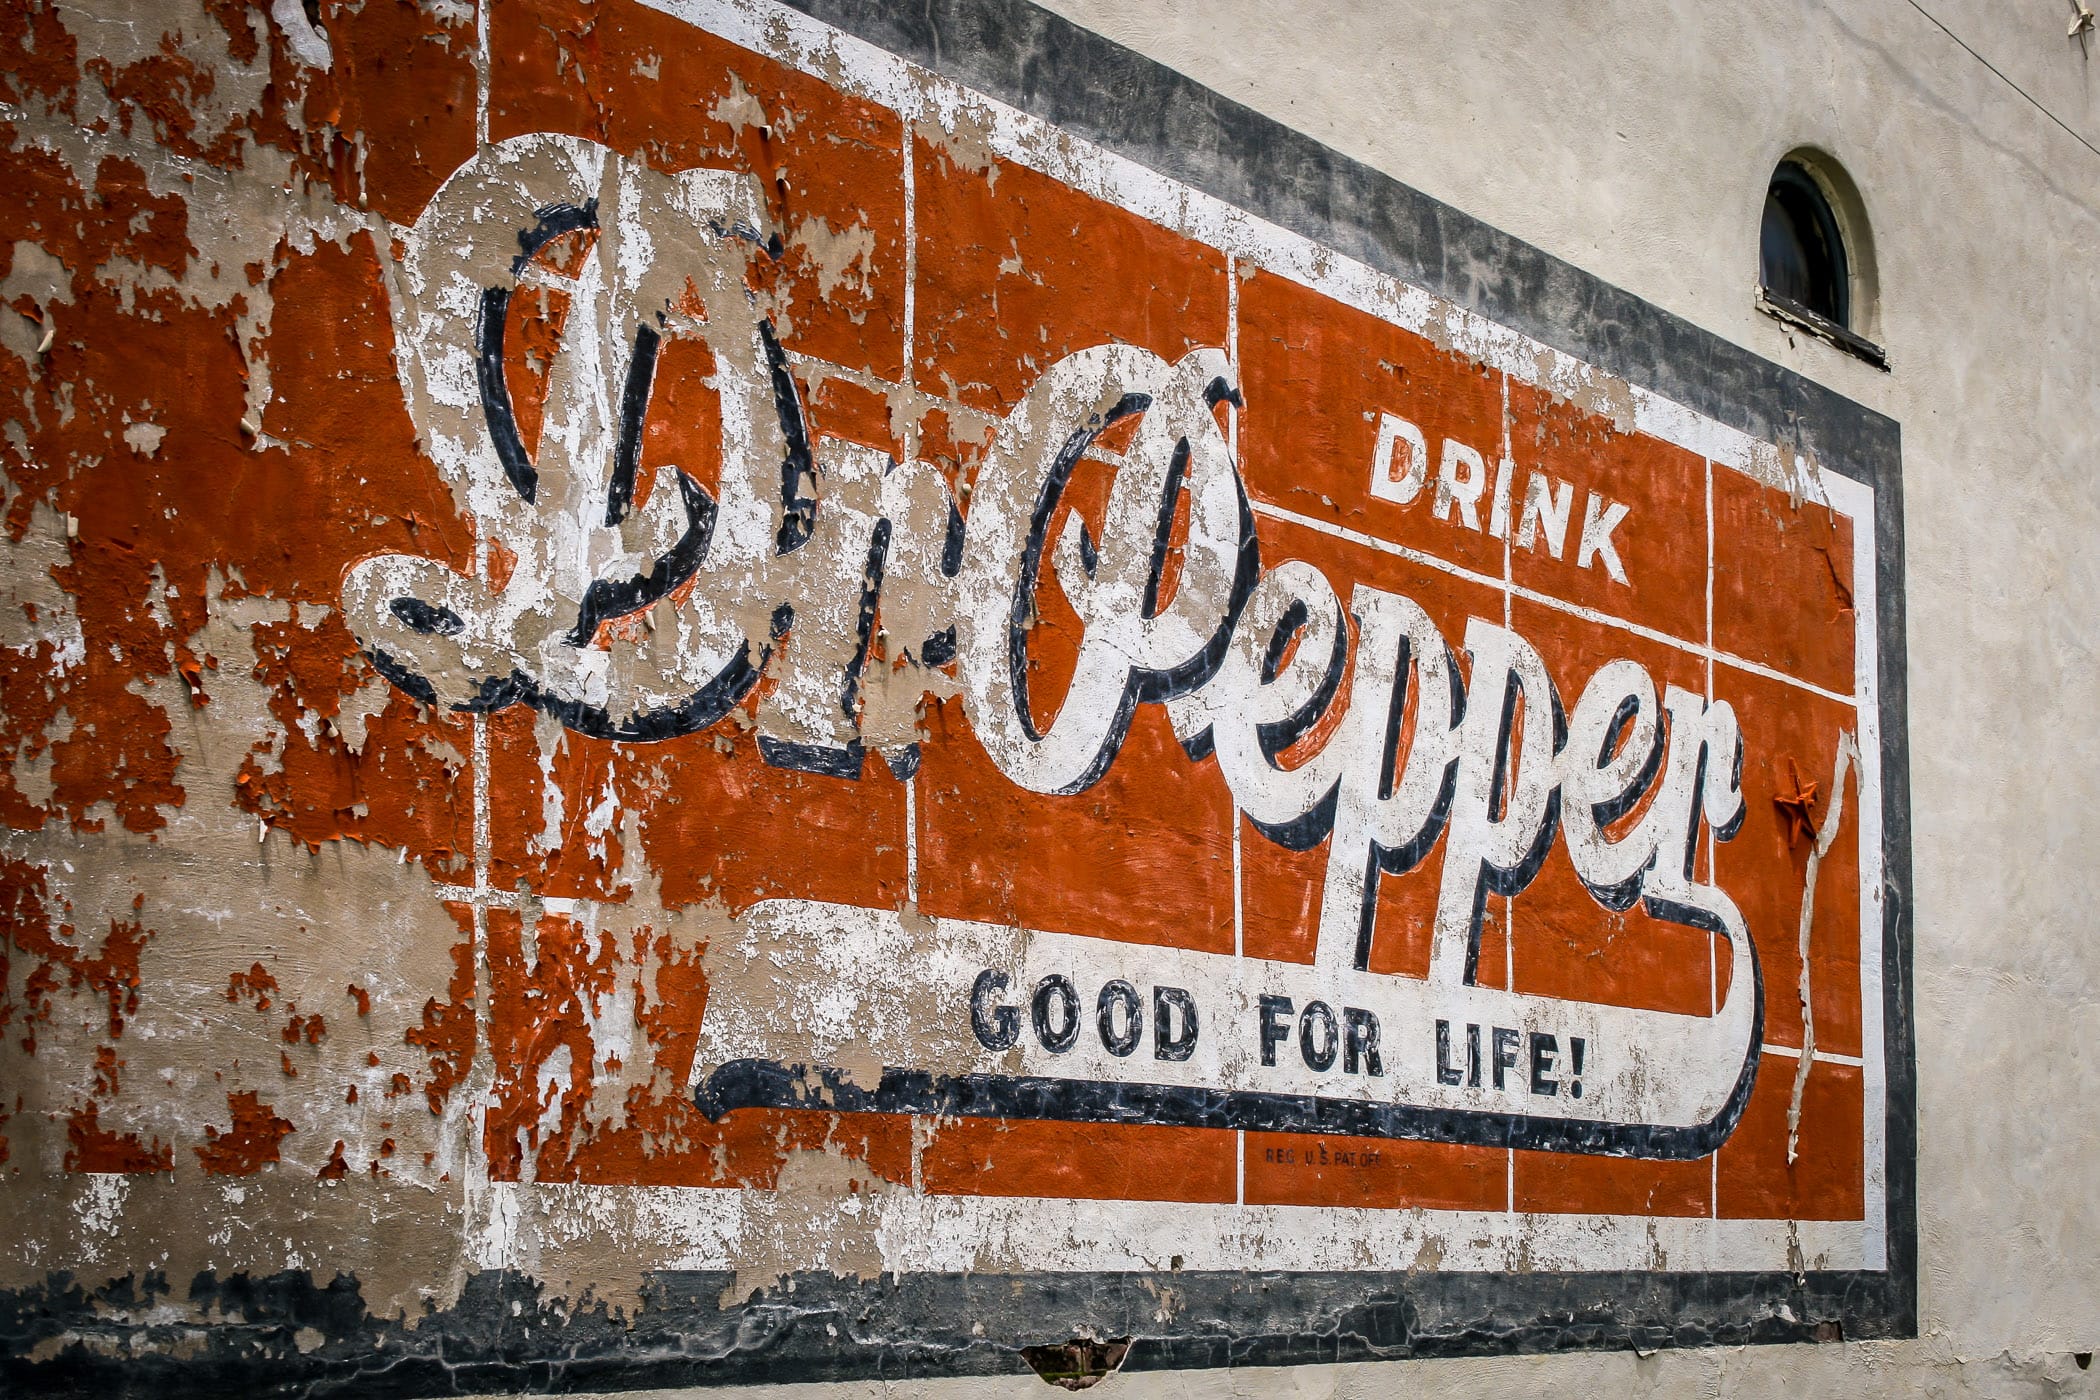 A cracked and fading Dr Pepper sign on the side of a decaying building in Downtown Pilot Point, Texas.